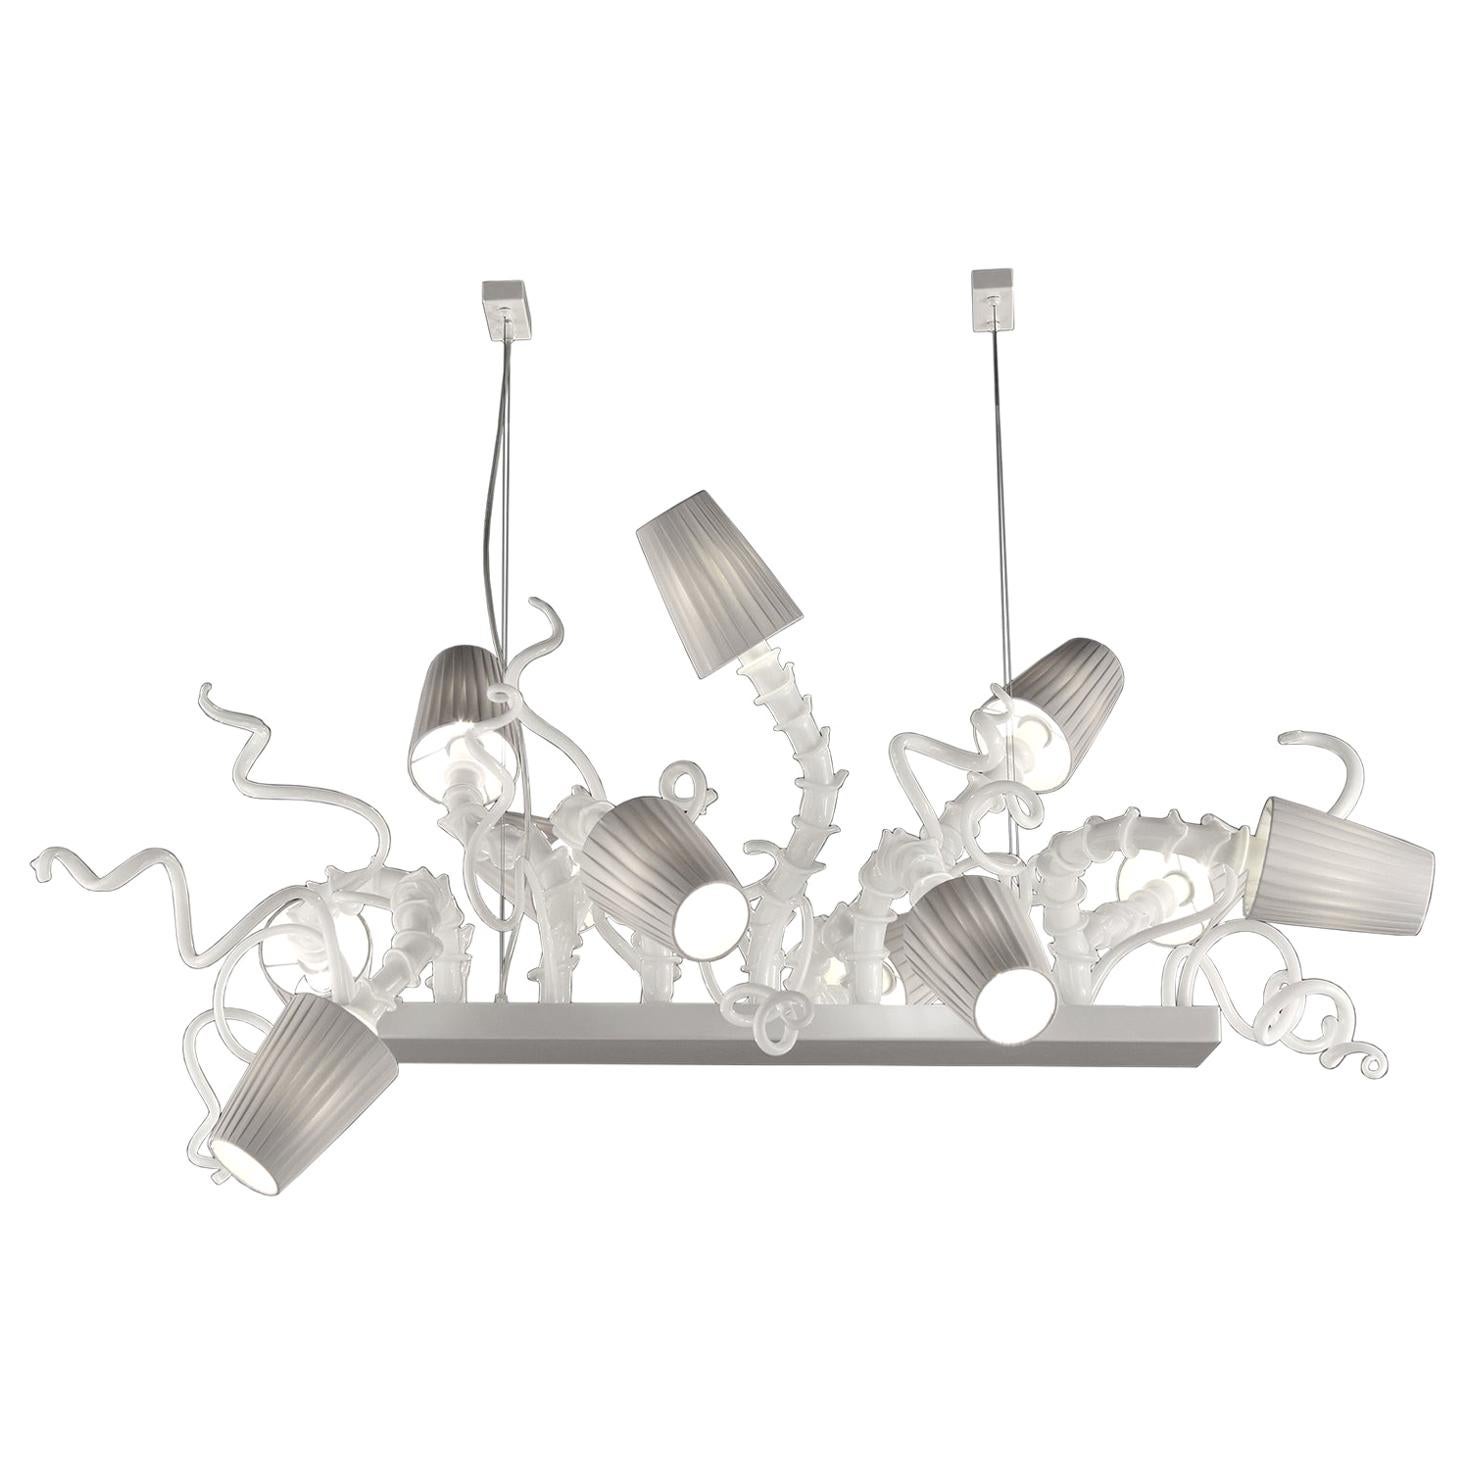 21st Century Artistic Chandelier 11 Arms Handmade Murano Glass by Multiforme